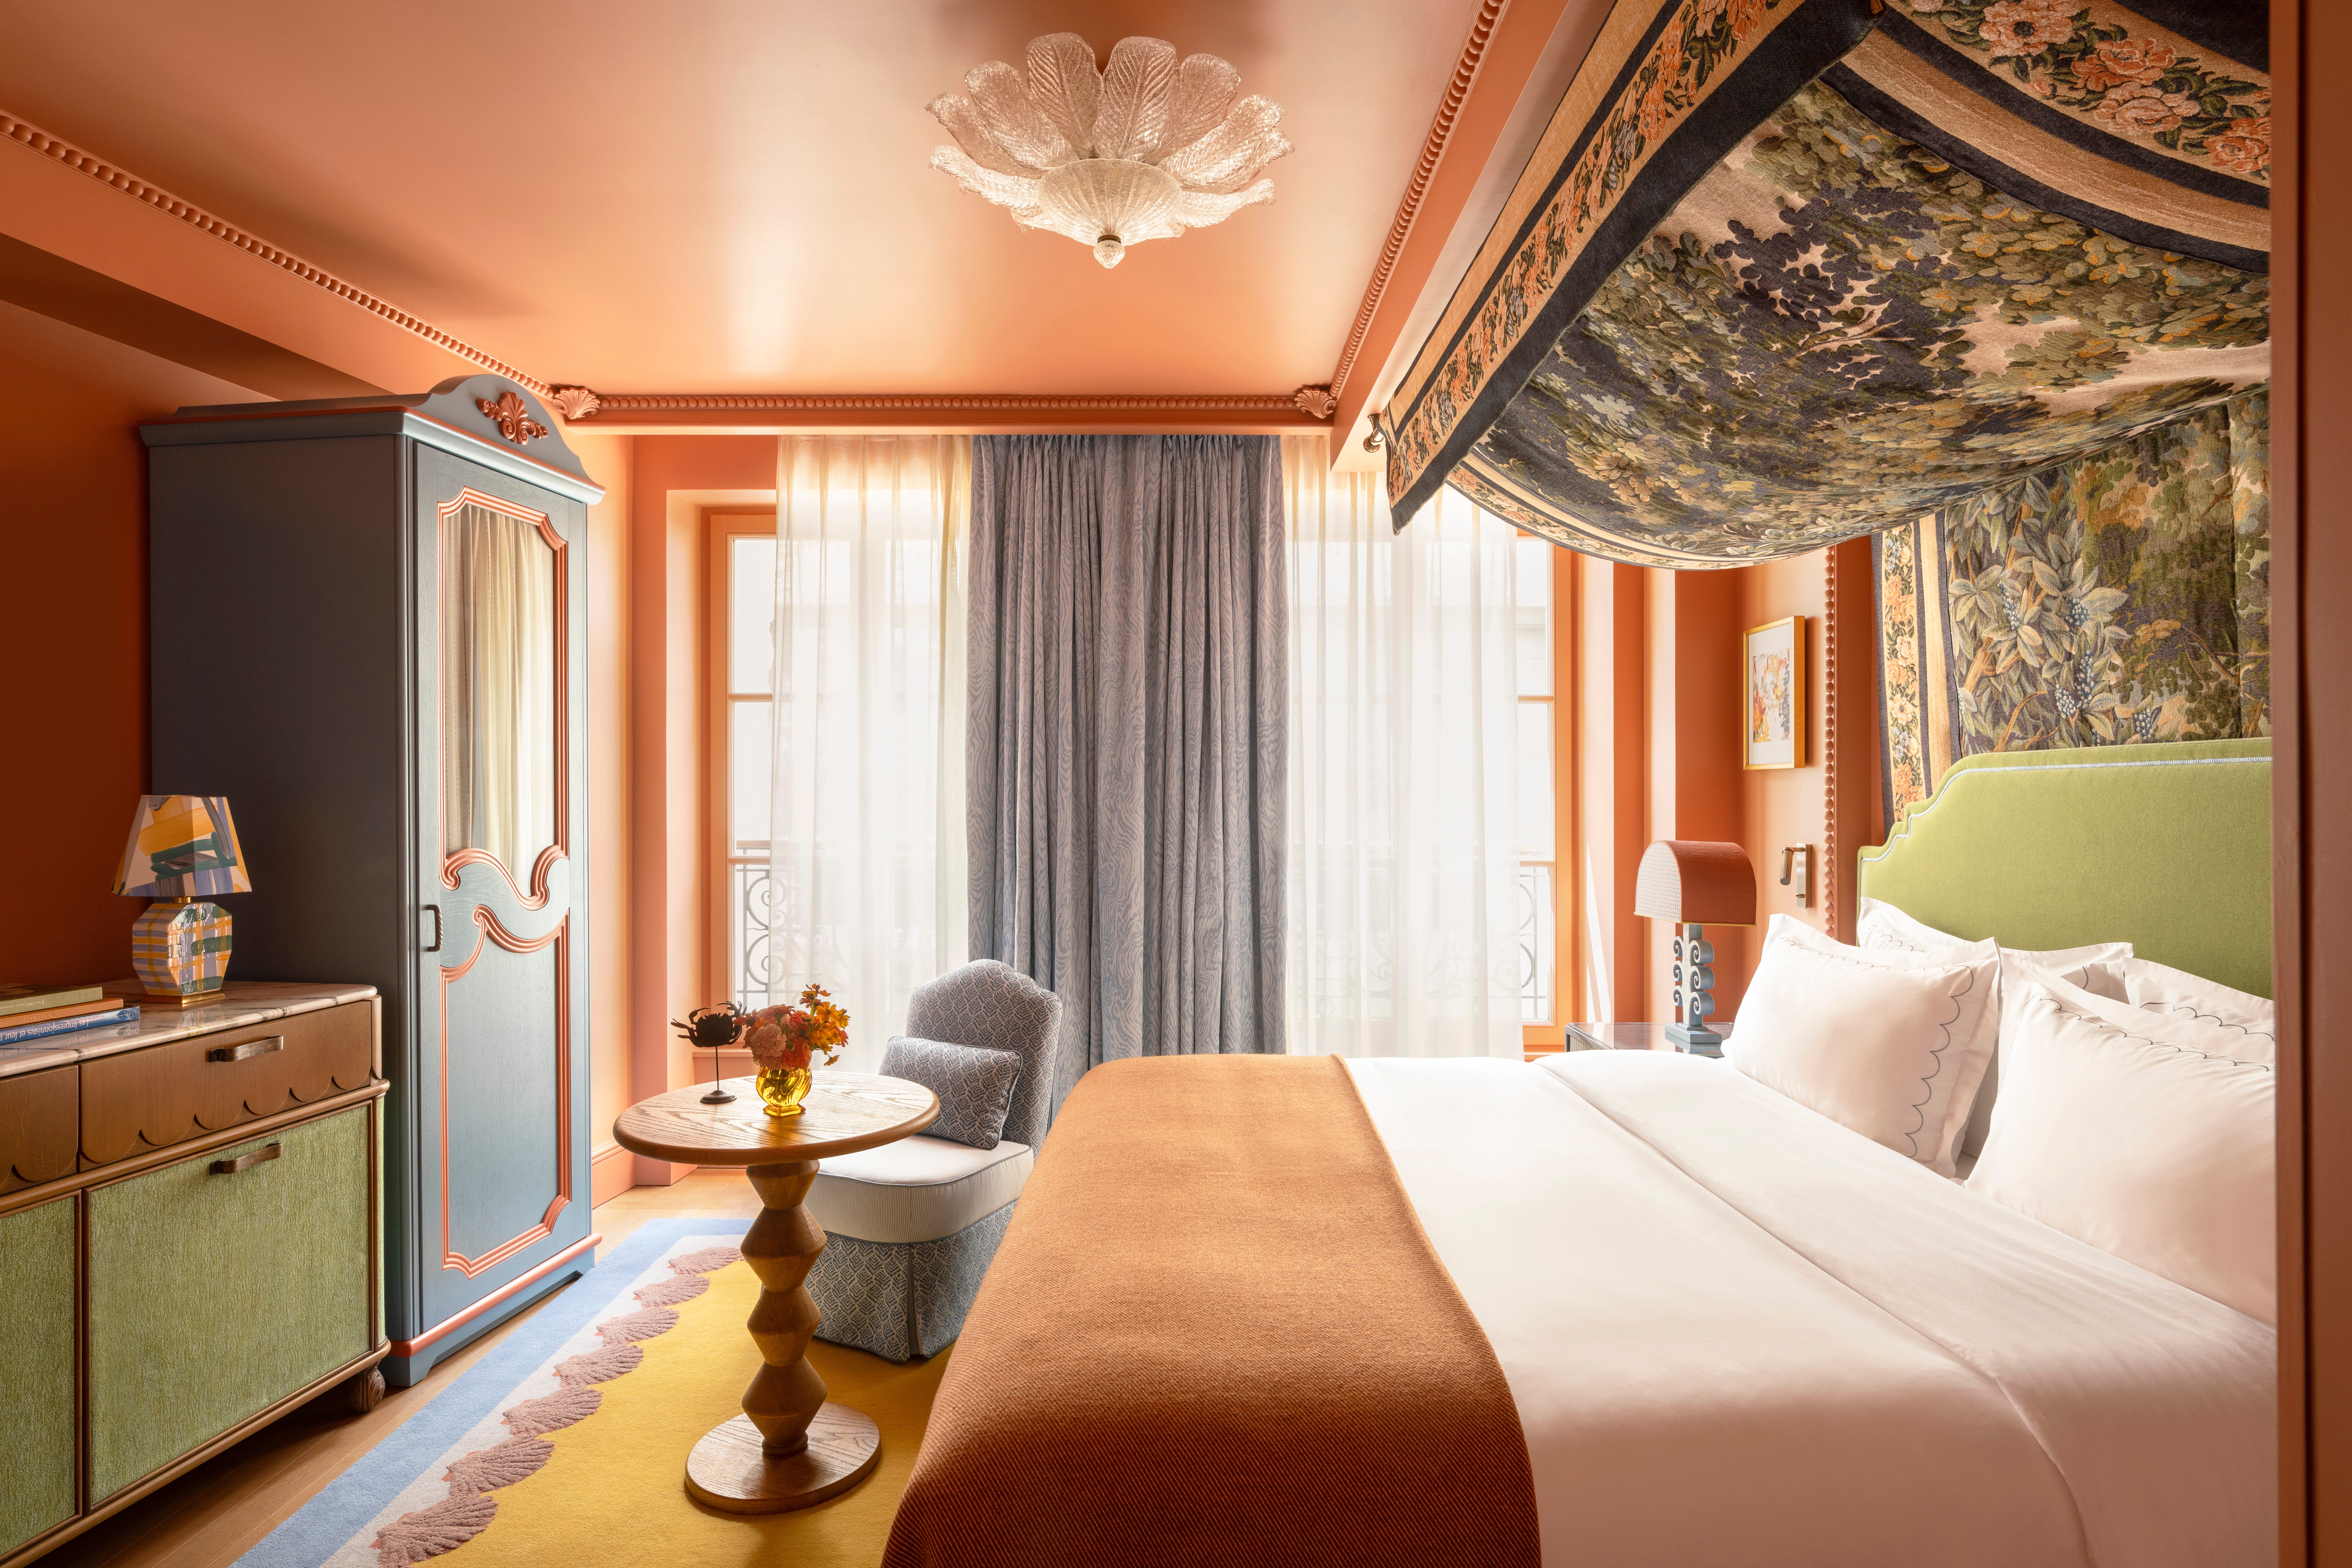 Rooms at the Le Grand Mazarin feel palatial, stylish and very comfortable